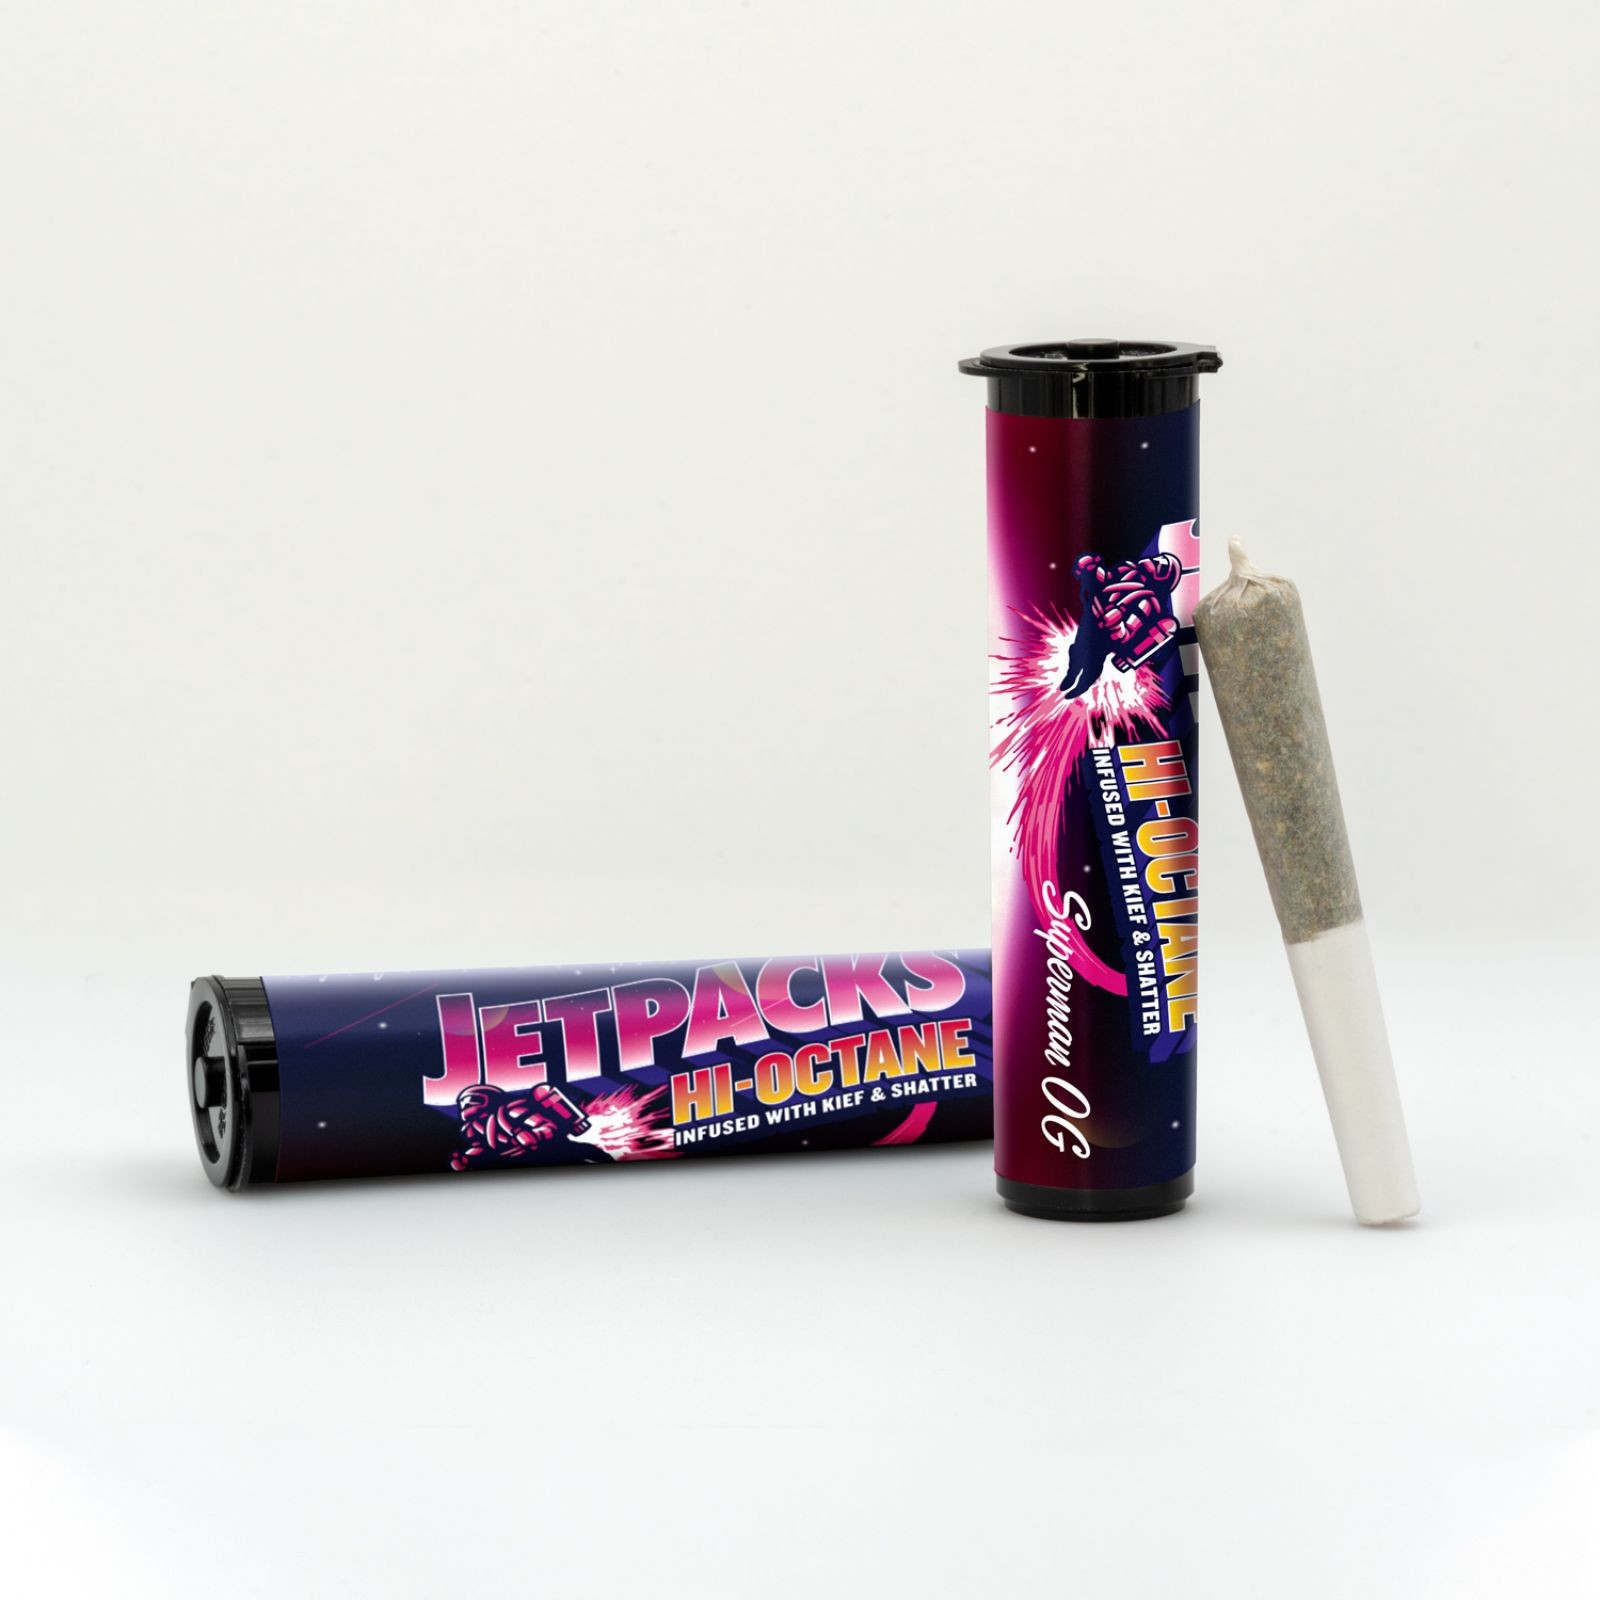 Jetpacks Infused pre-roll Greenery spot (Review in comment) : r/NYSCannabis